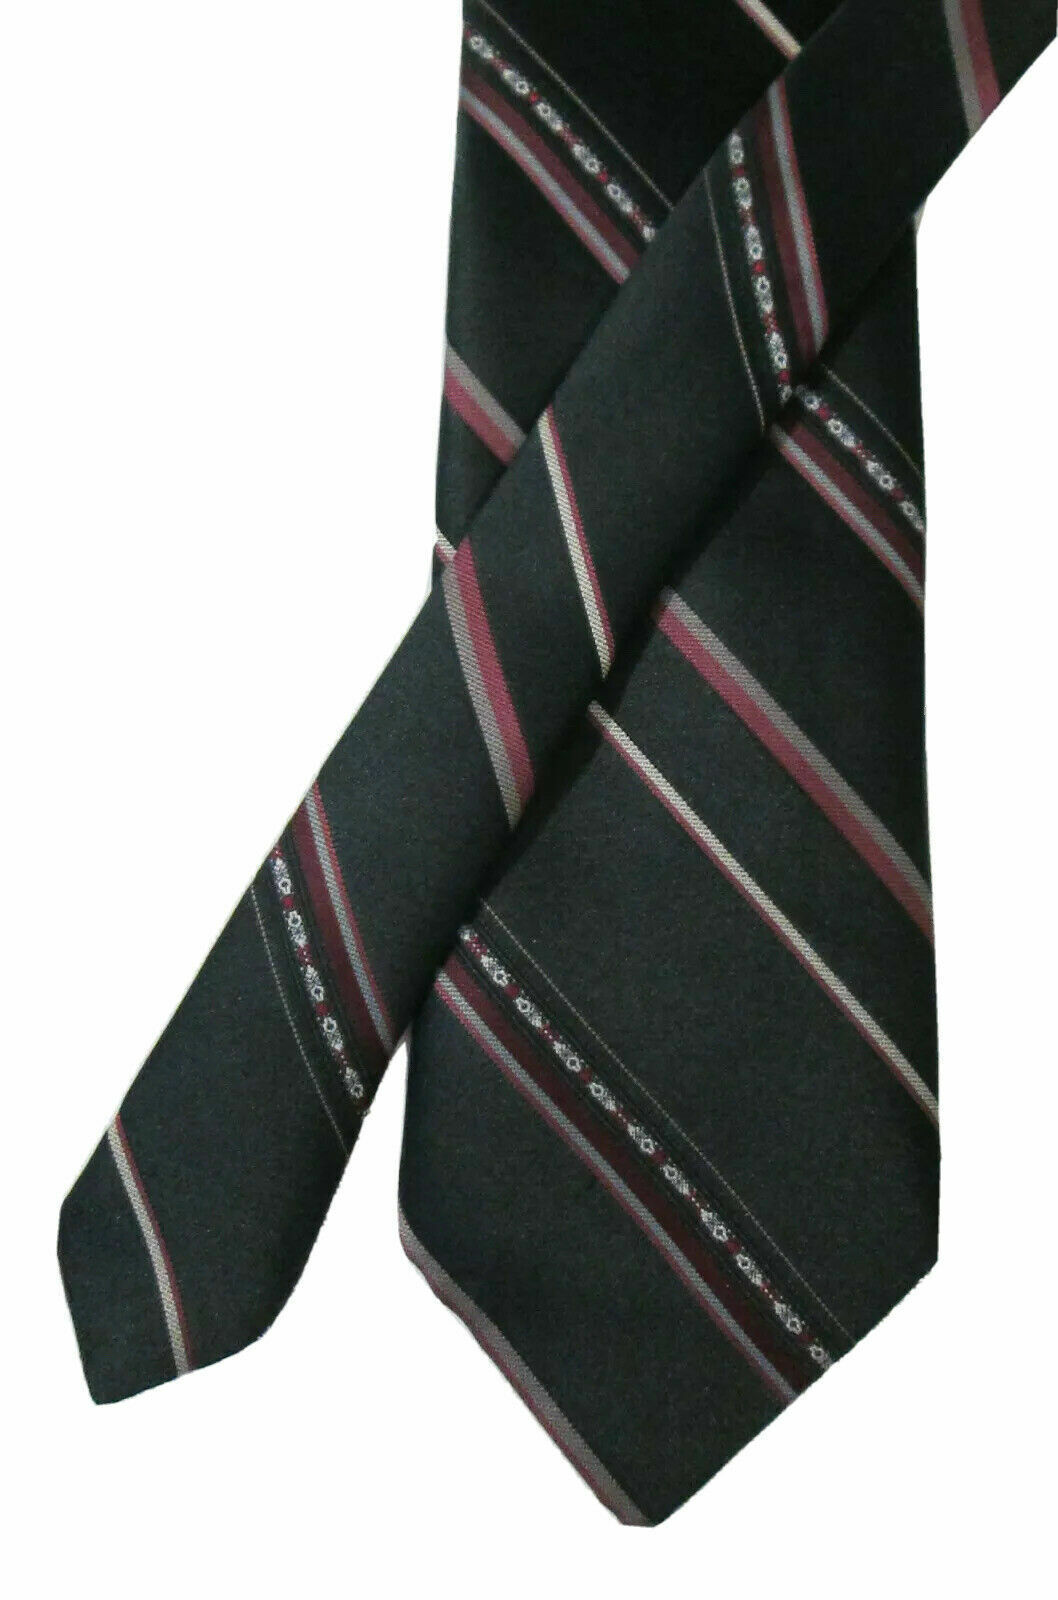 Primary image for  KETCH Black Burgundy Red and Gray Stiped Shiny Tie 100% Polyester